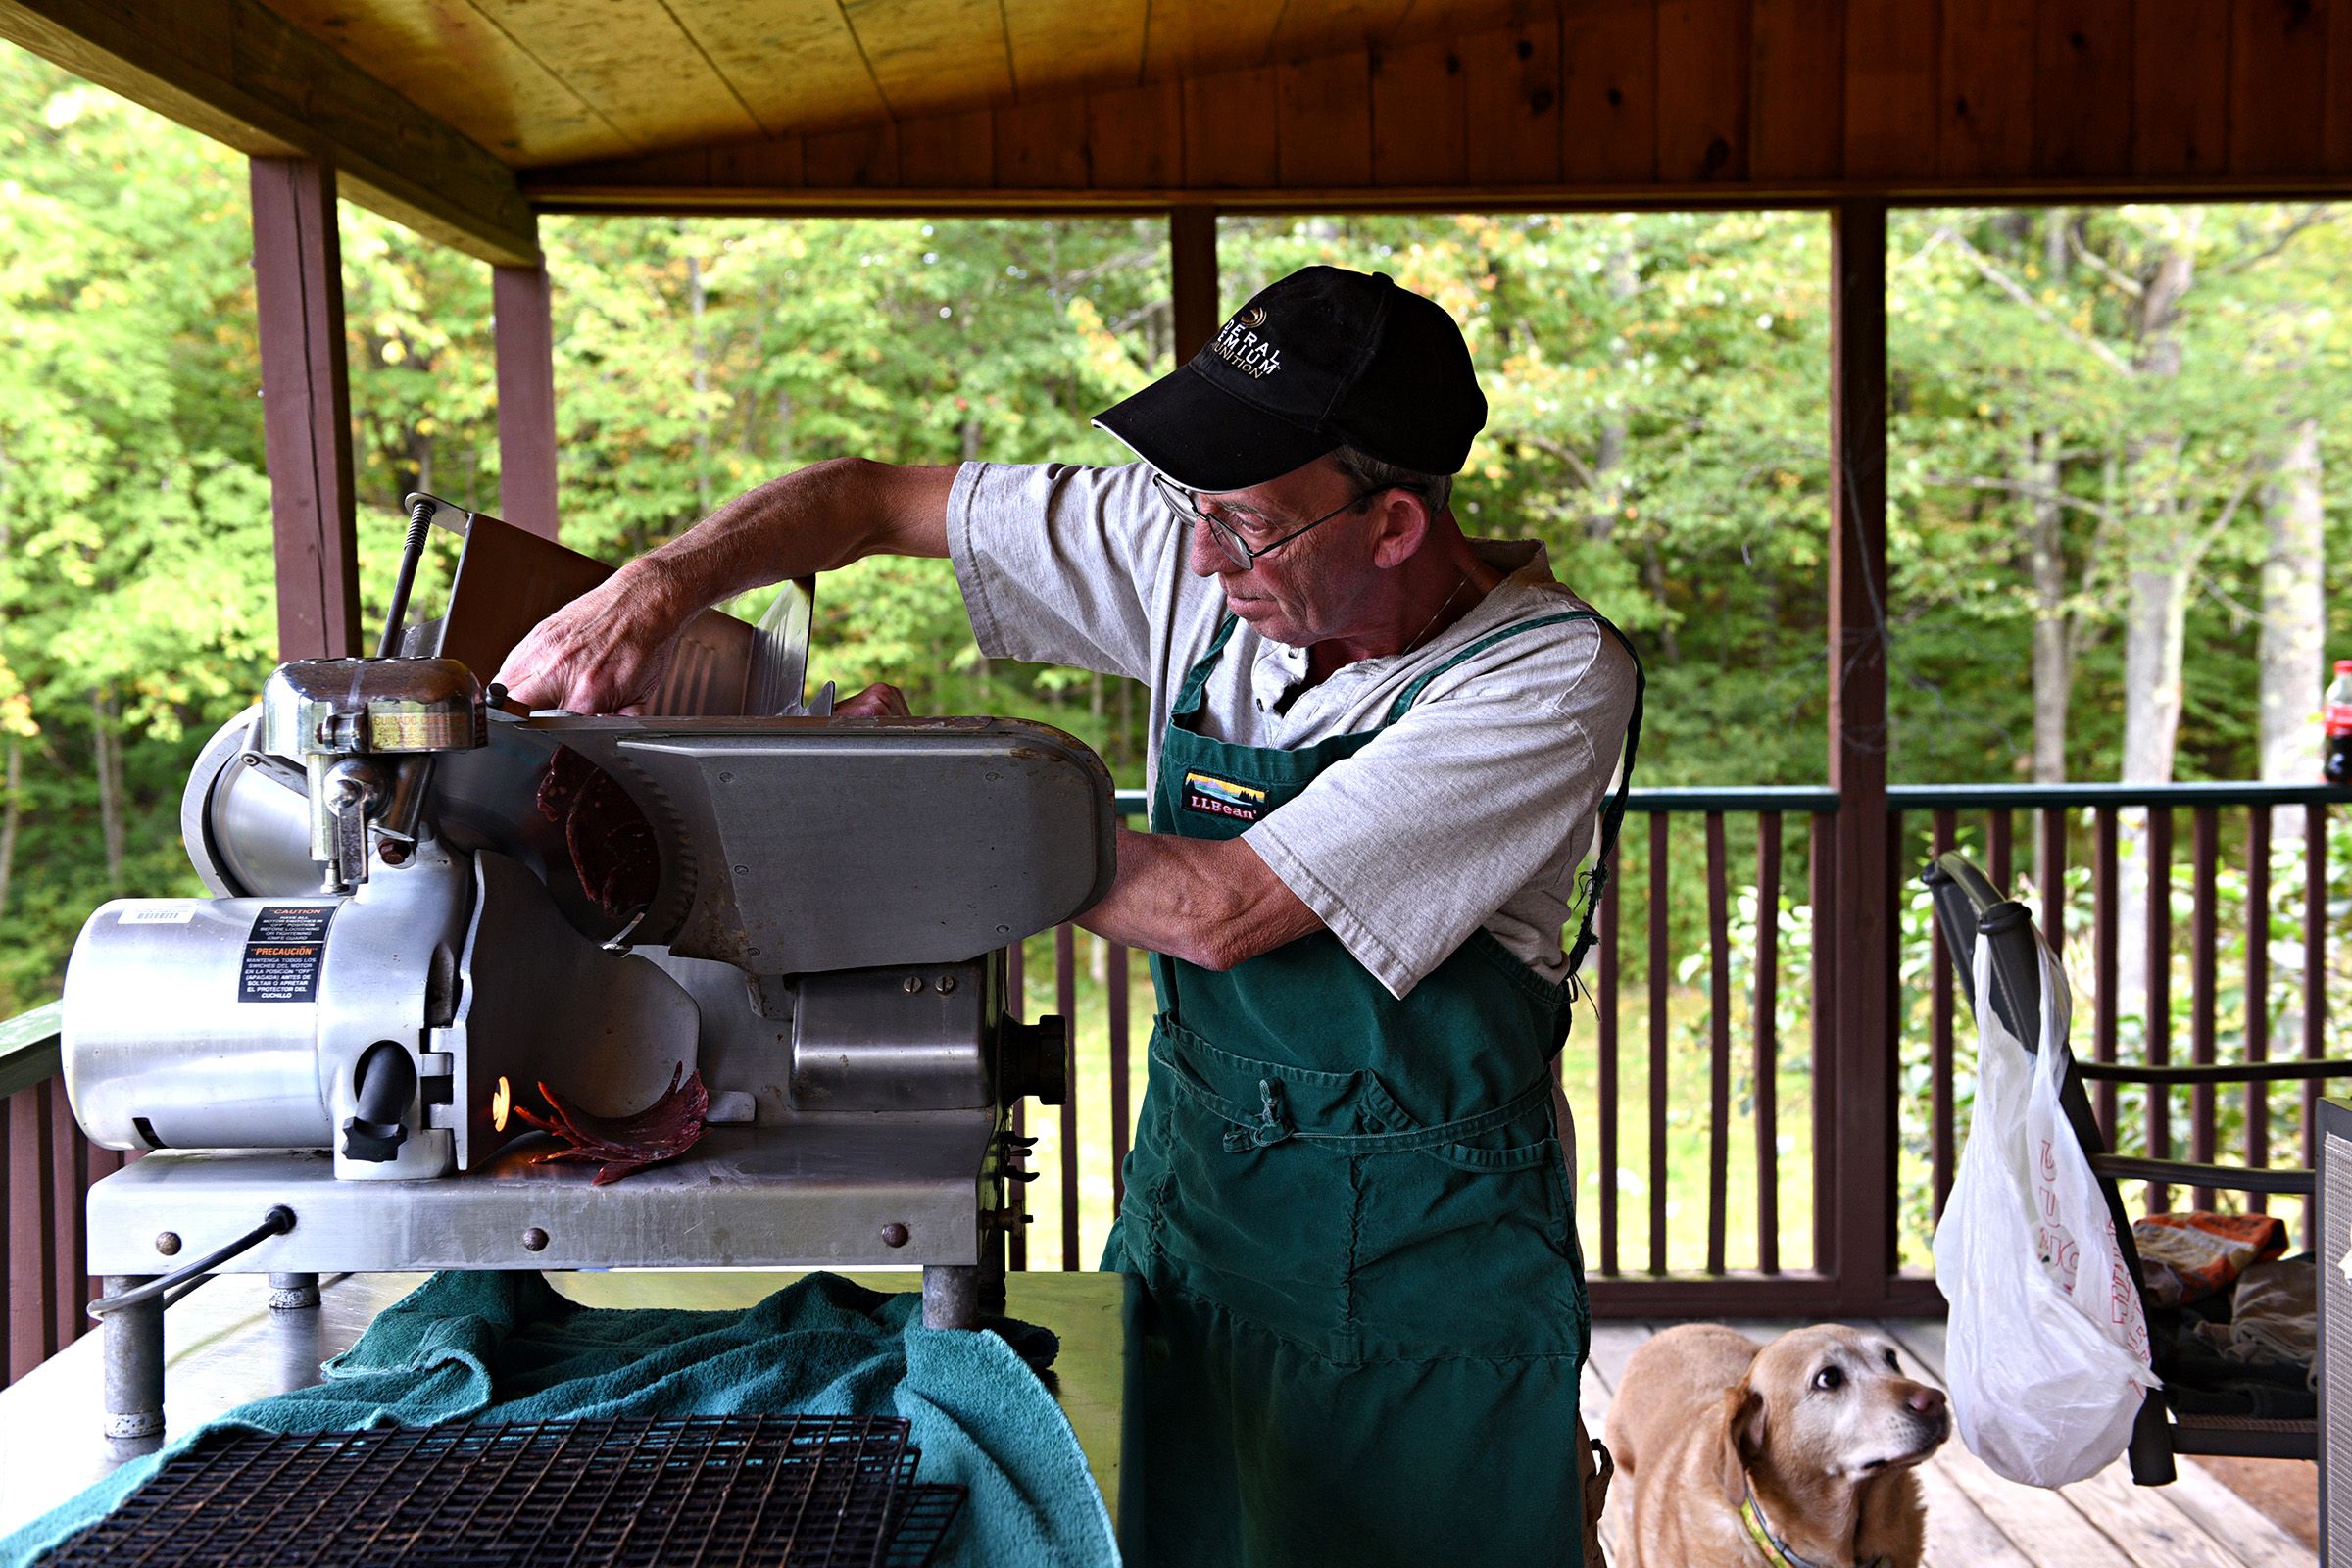 Sean Bohman, of Warner, N.H., slices frozen buffalo livers at his home on Tuesday, Sept. 24, 2019. Bohman and his wife dehydrate organ meat to make 3 Biddy's Pet Treats. (Valley News - Jennifer Hauck) Copyright Valley News. May not be reprinted or used online without permission. Send requests to permission@vnews.com.